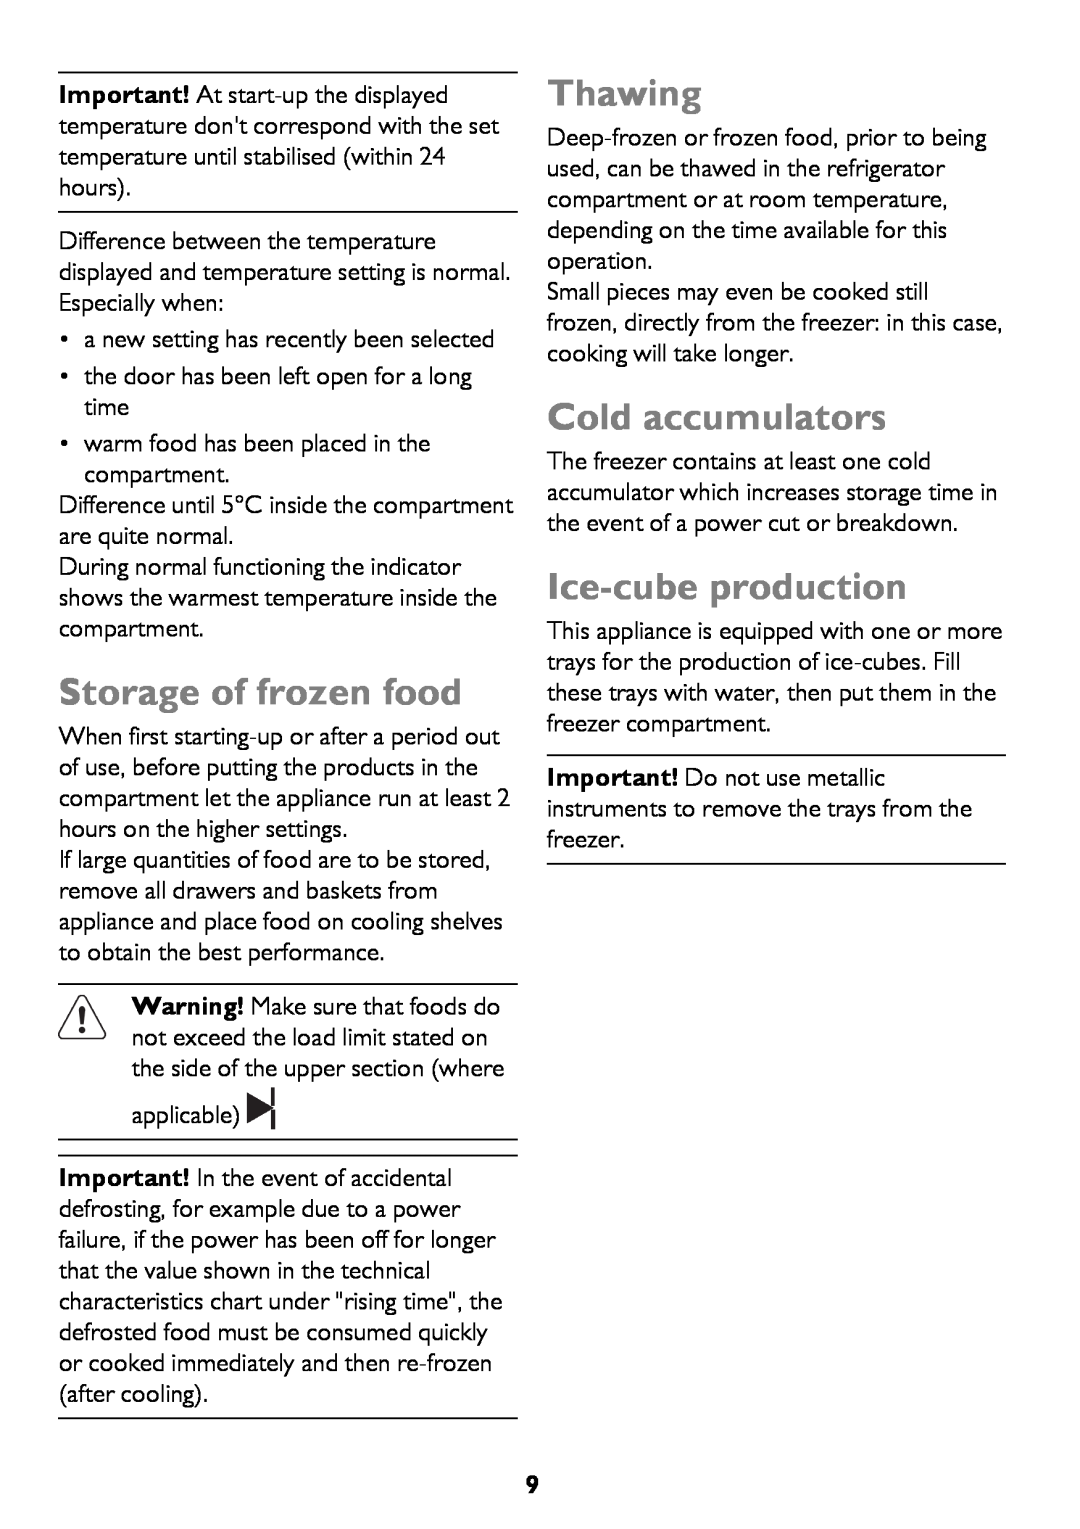 John Lewis JLFZW1601 instruction manual Storage of frozen food, Thawing, Cold accumulators, Ice-cube production 